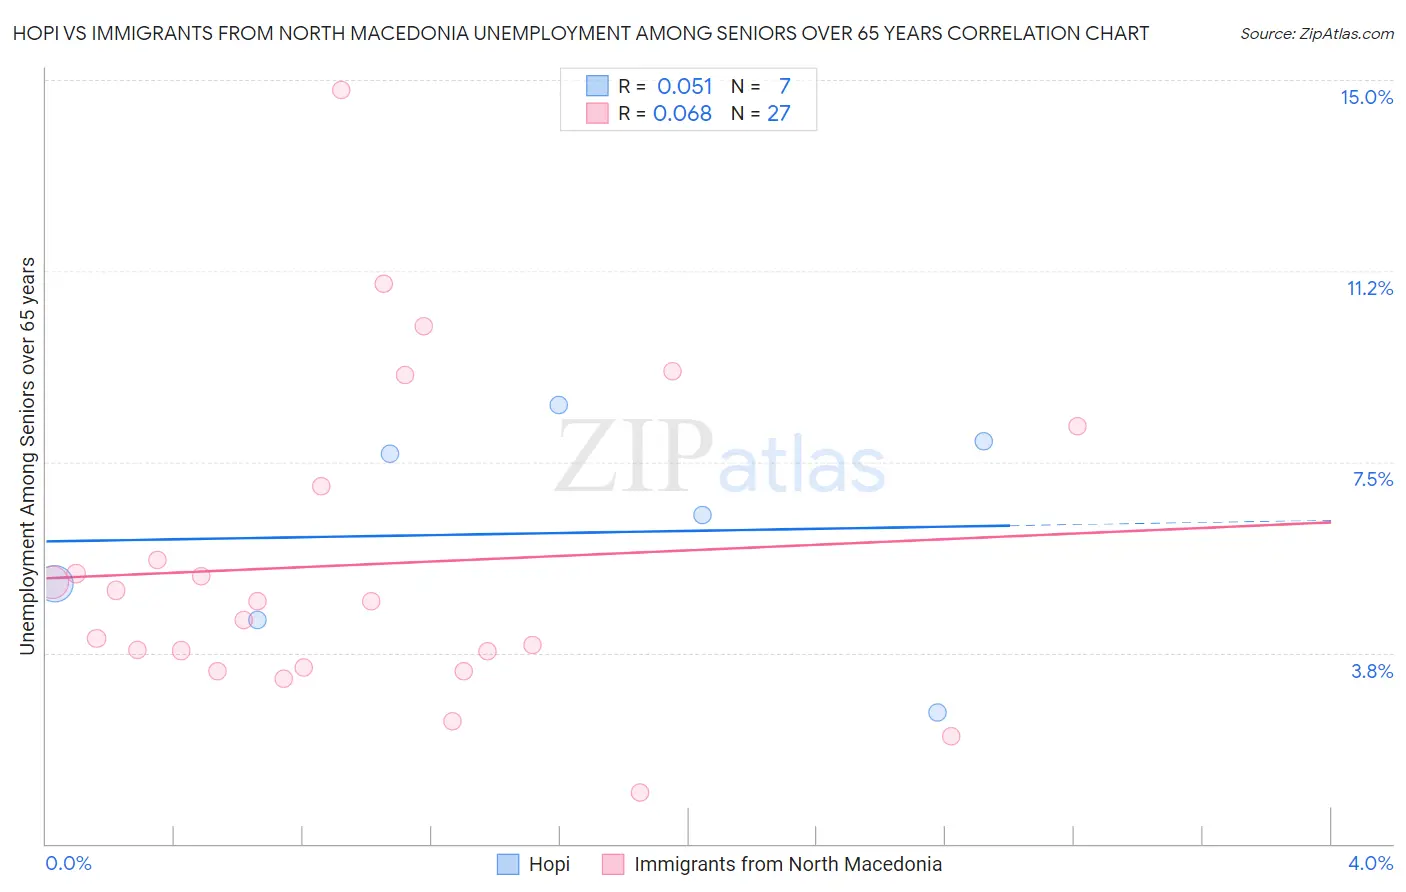 Hopi vs Immigrants from North Macedonia Unemployment Among Seniors over 65 years